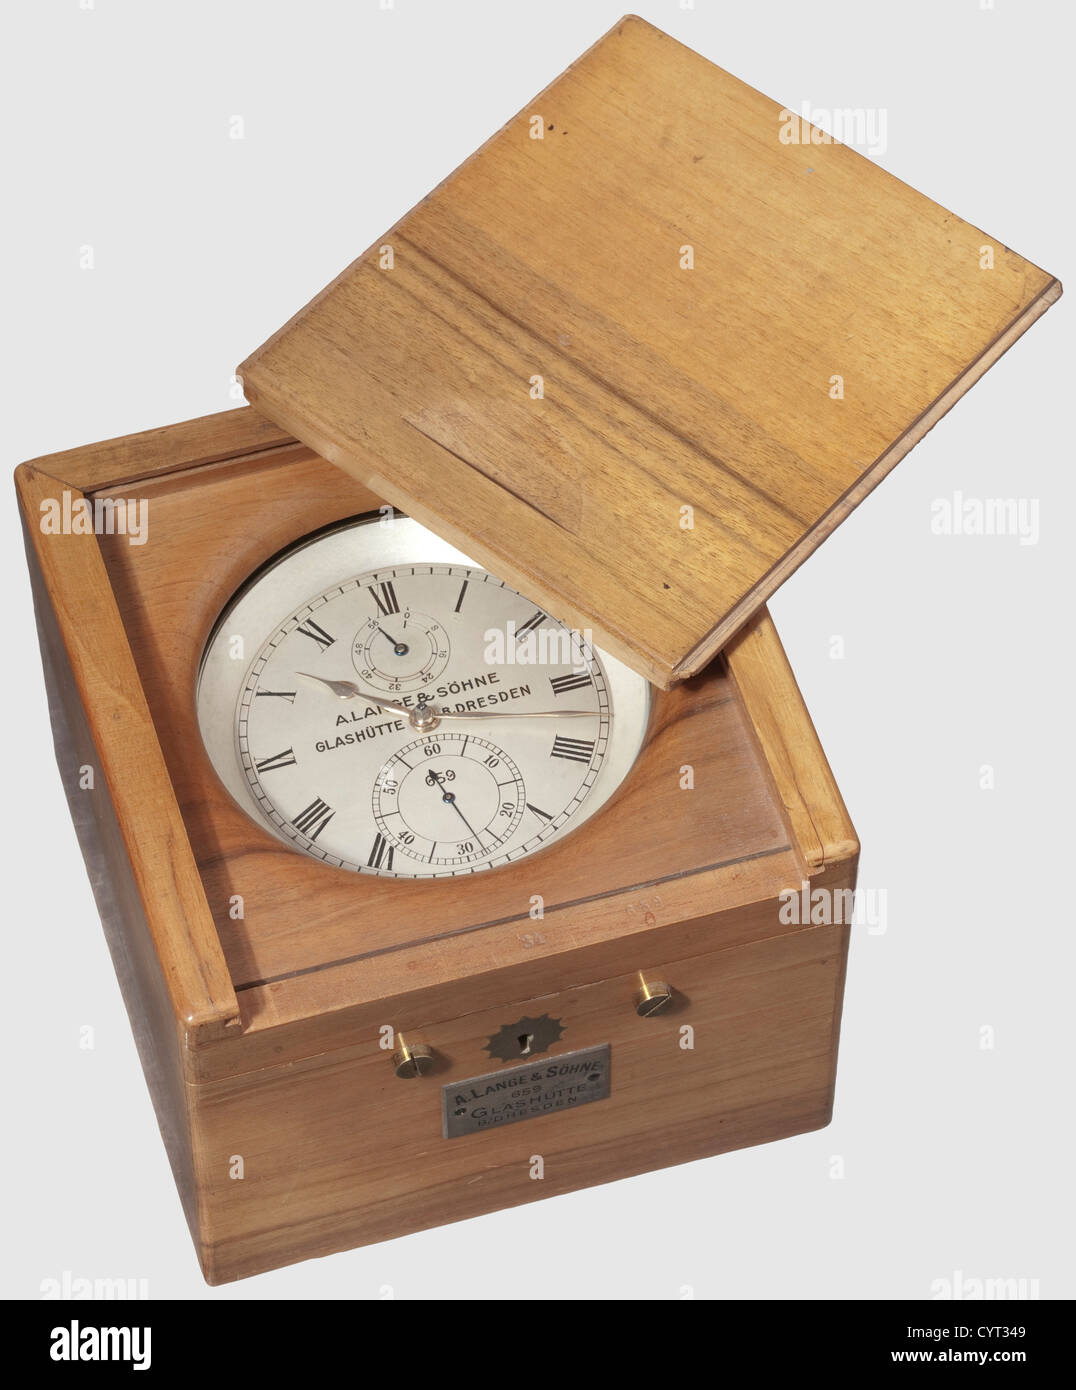 Hermann Göring(1883 - 1946),an ultra-fine marine chronometer A Lange & Sons,Glashütte,B/Dresden,No. 659. Sold in the year 1936 to the Reich Minister of Aviation Hermann Göring(copy of the original dispatch book included). Brass works,polished,silver-plated hands inlaid Roman numerals,small second-hand and 56 h power reserve indicator(blued hands),locking device,housing number 659 and maker's mark,in a matching-numbered lockable wooden case(key missing),without universal suspension,matching-numbered clock key laid in,transparent yellow plastic d,Additional-Rights-Clearences-Not Available Stock Photo